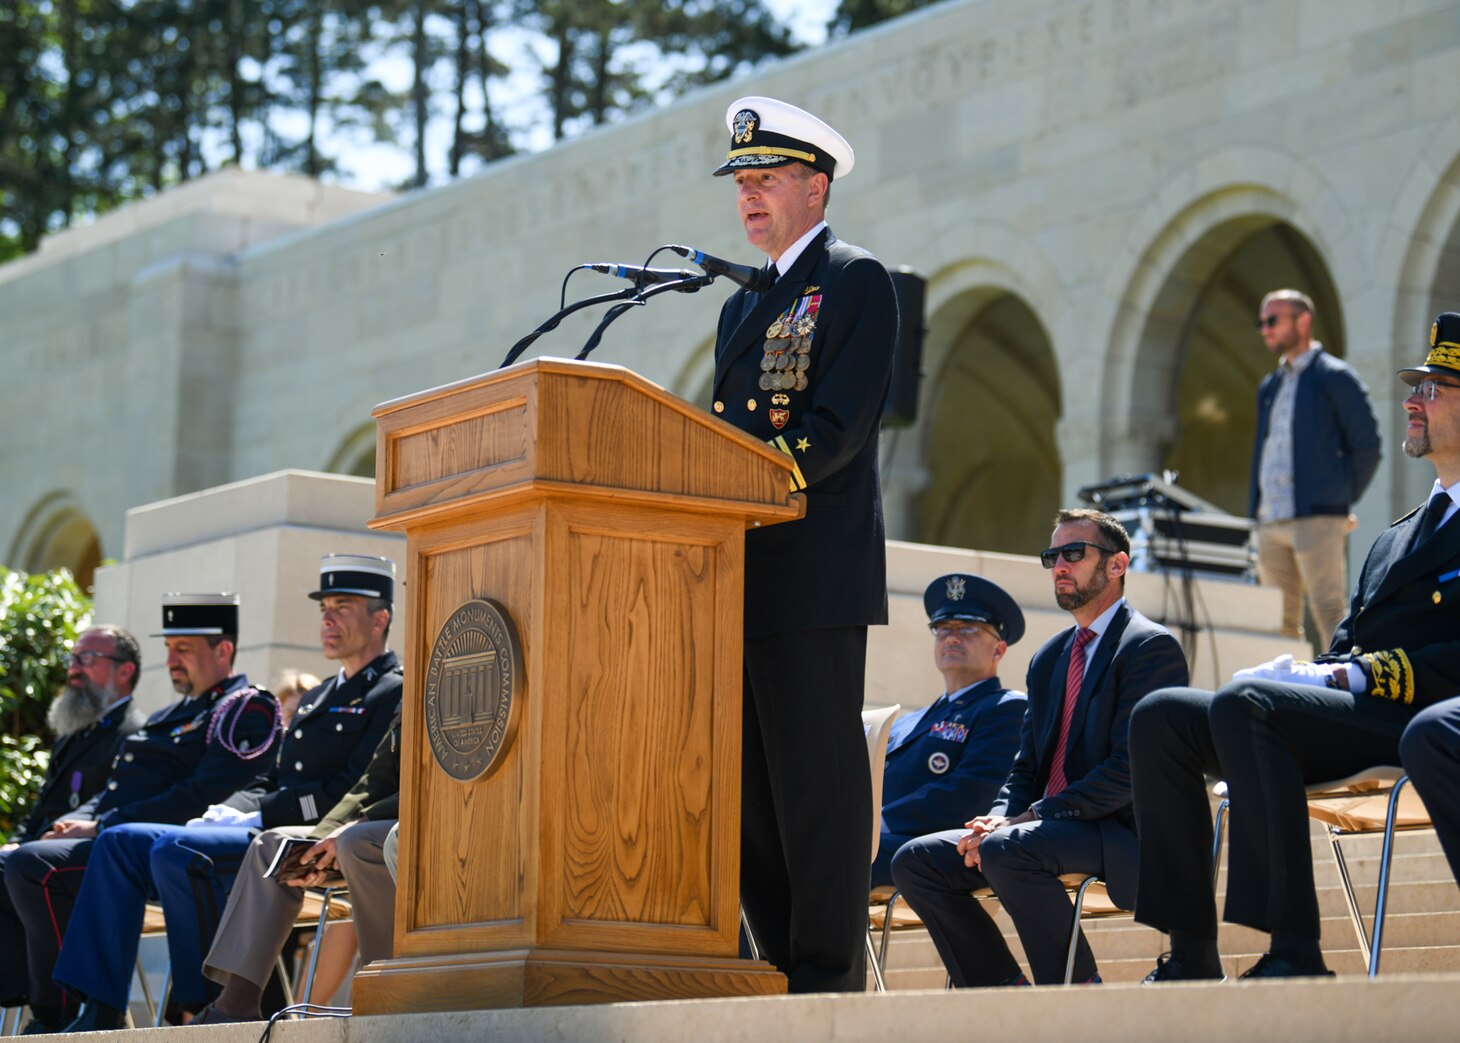 ROMAGNE-SOUS-MONTFAUCON, France (May 28, 2023) – U.S. Navy Adm. Stuart B. Munsch, commander for the U.S. Naval Forces Europe – Africa and Allied Joint Force Command Naples, provide remarks during the Meuse-Argonne American Cemetery ceremony in Romagne-sous-Montfaucon, France, May 28, 2023. Admirals from the U.S. Naval Forces Europe-Africa, U.S. Sixth Fleet, and Navy Region Europe, Africa, Central traveled throughout Europe visiting American Battle Monuments Commission cemeteries to honor the lives and legacies of fallen U.S. and Allied service members who paid the ultimate price through servicing their countries. Headquarters in Naples, Italy, NAVEUR-NAVAF operates U.S. naval forces in the U.S. European Command and U.S. Africa Command area of responsibility. U.S. Sixth Fleet is permanently assigned to NAVEUR-NAVAF and employs maritime forces through the full spectrum of joint and naval operations.